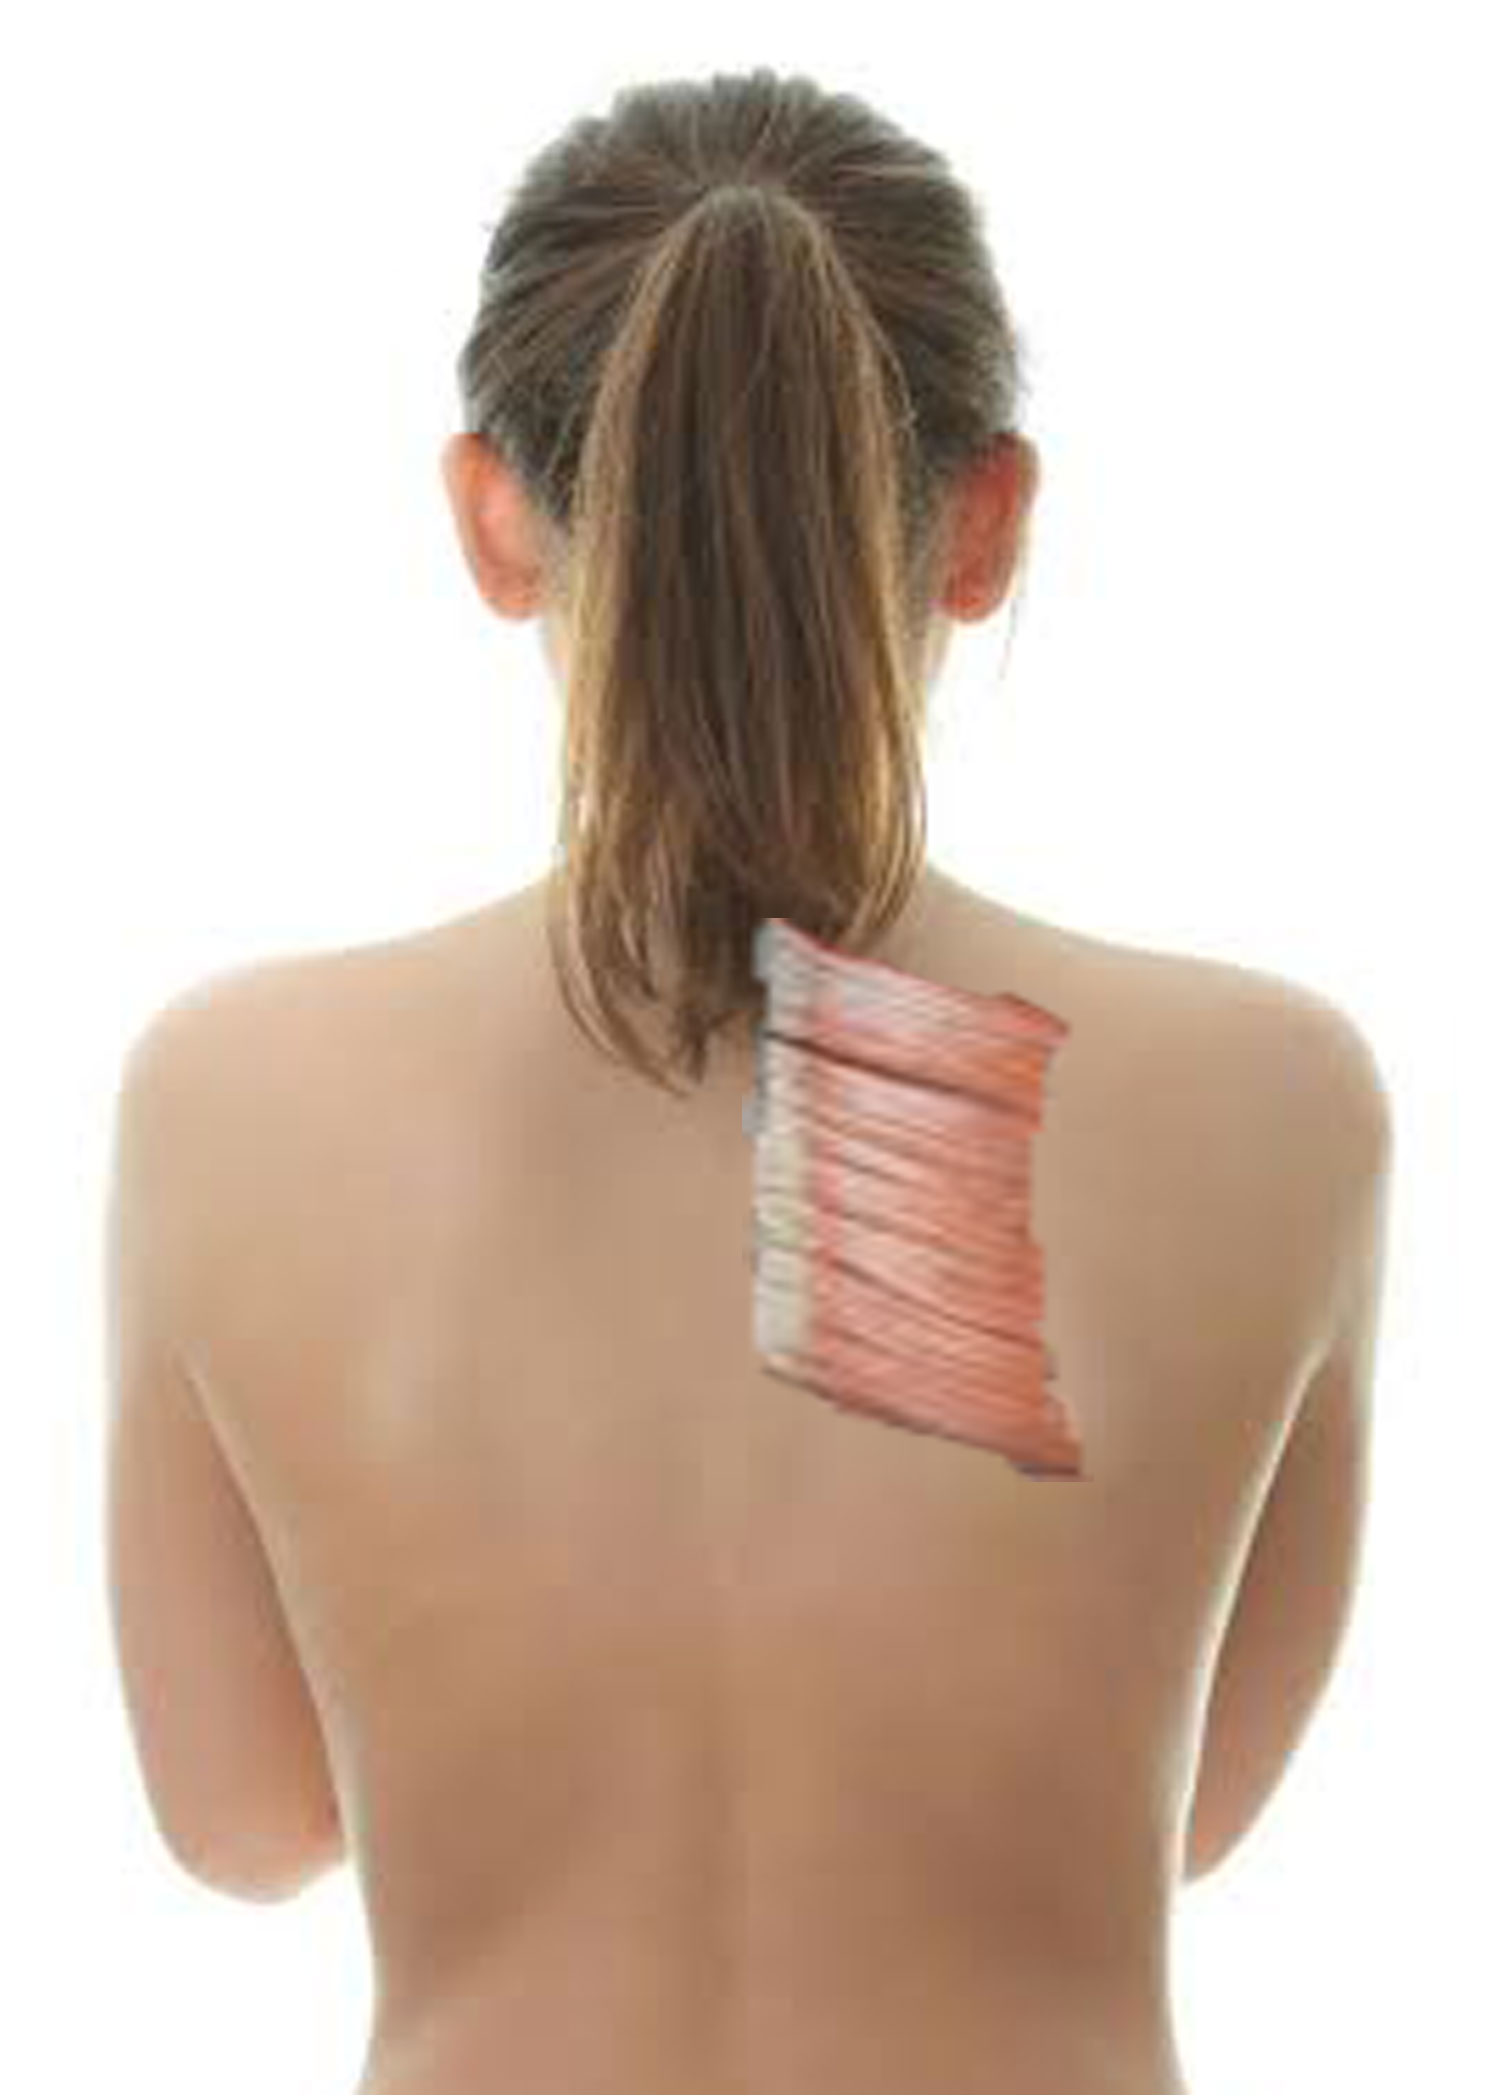 SELF MASSAGE for SHOULDER BLADE AREA TENSION and PAIN RELIEF